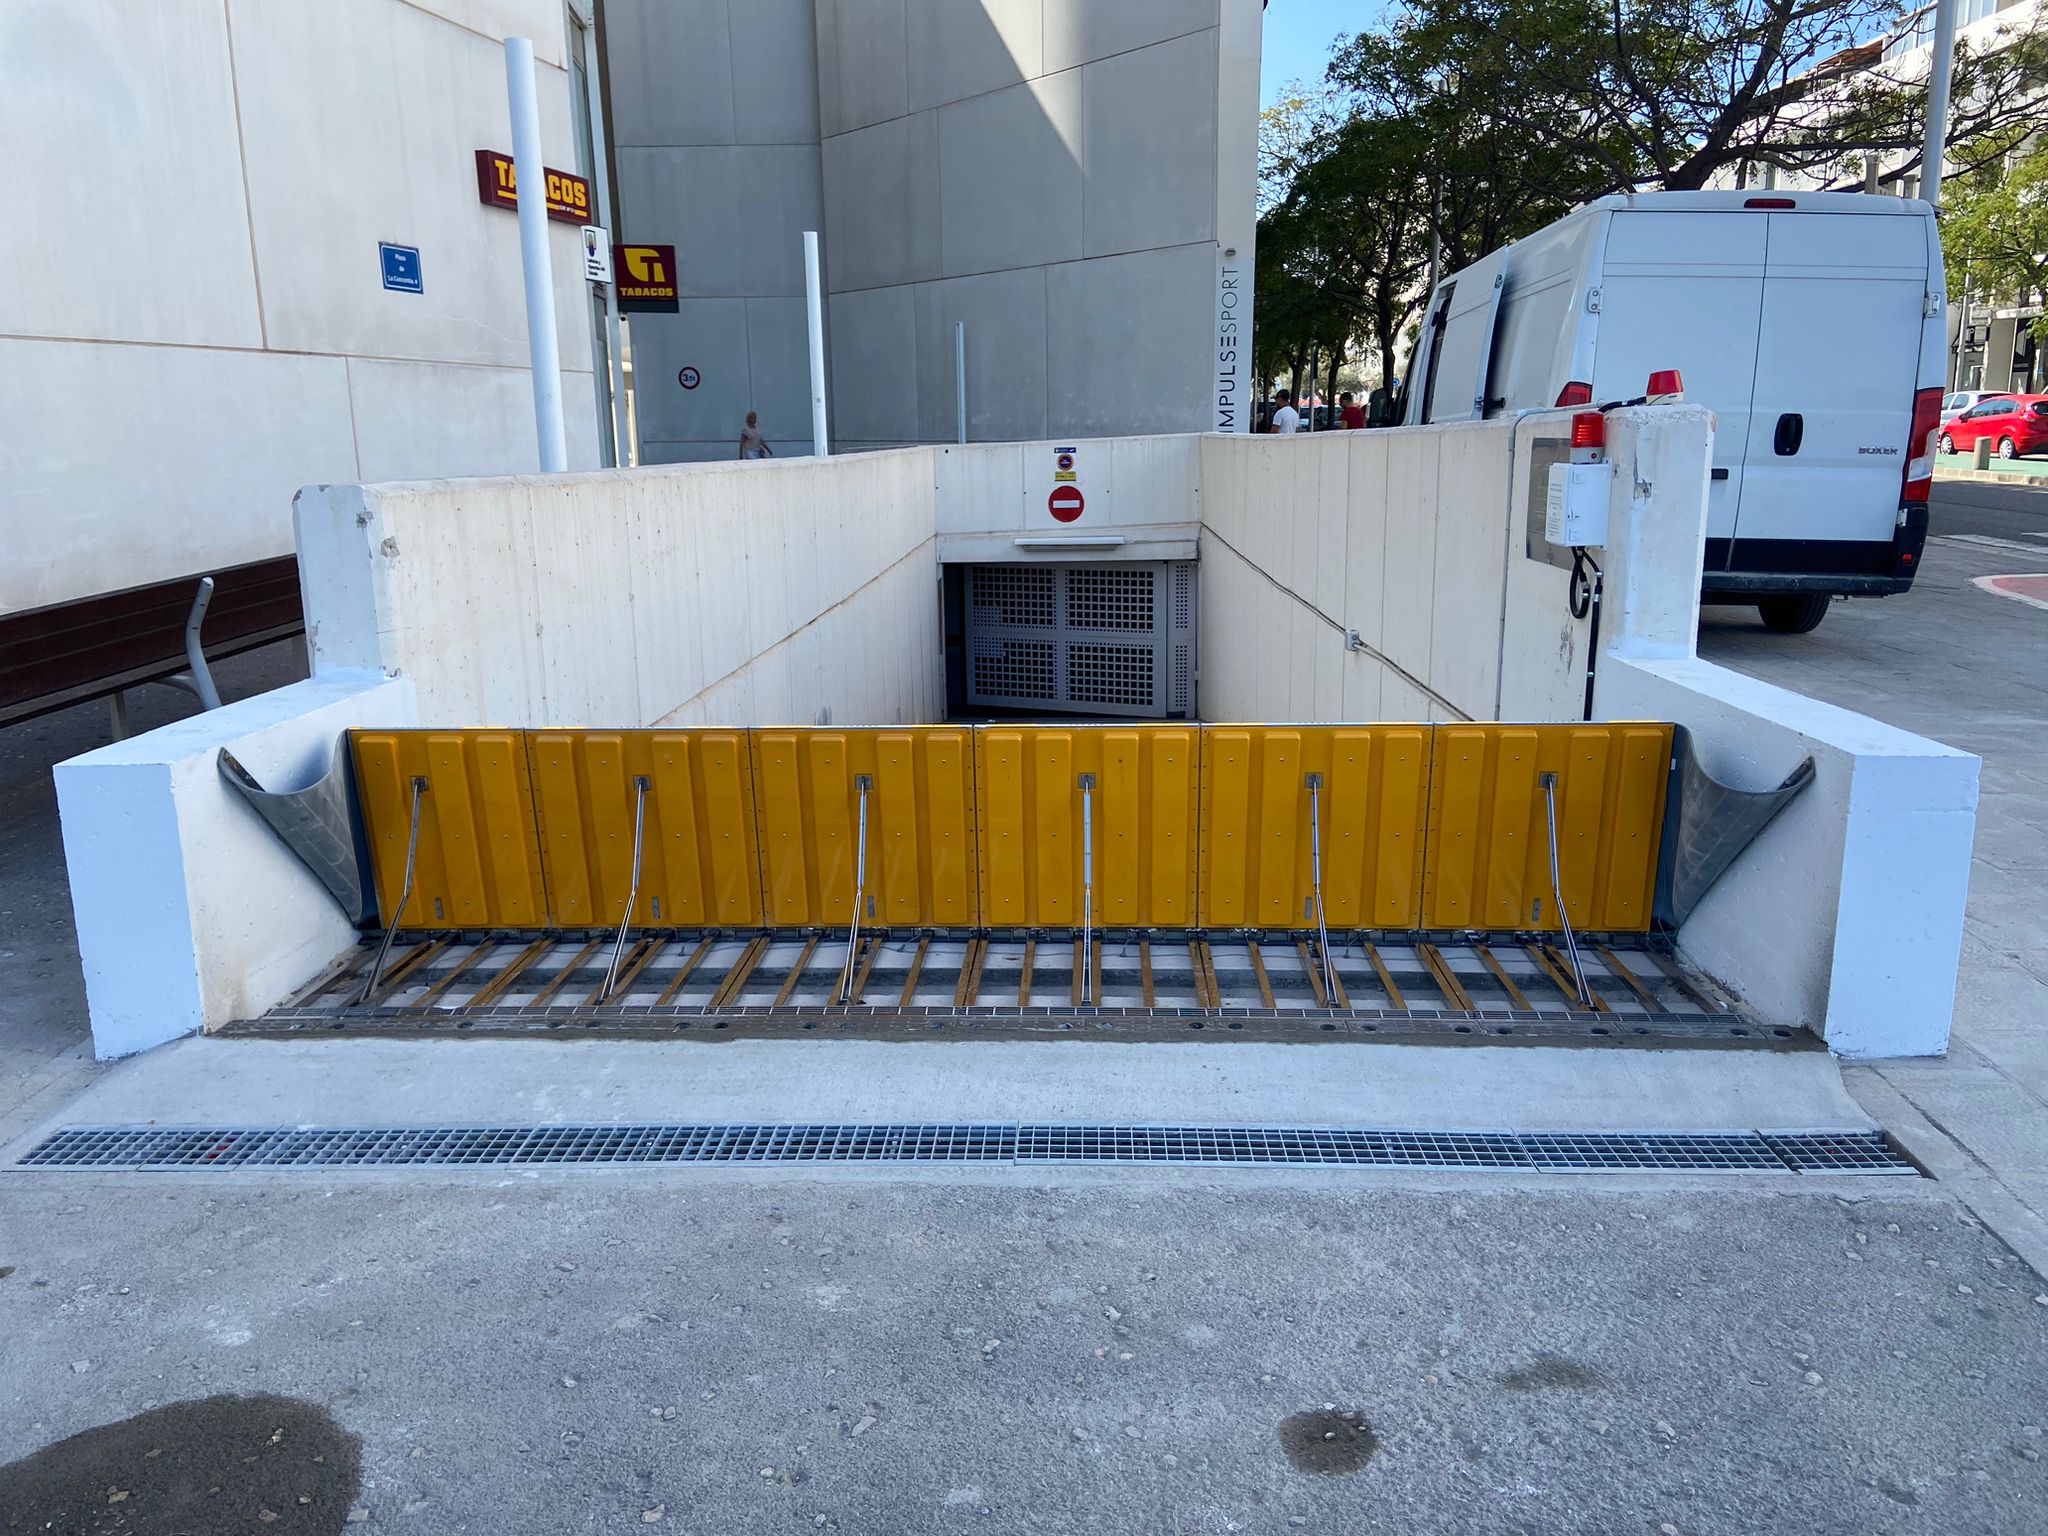 Lakeside install the first Hydraulic Automatic Flood Barrier in Spain